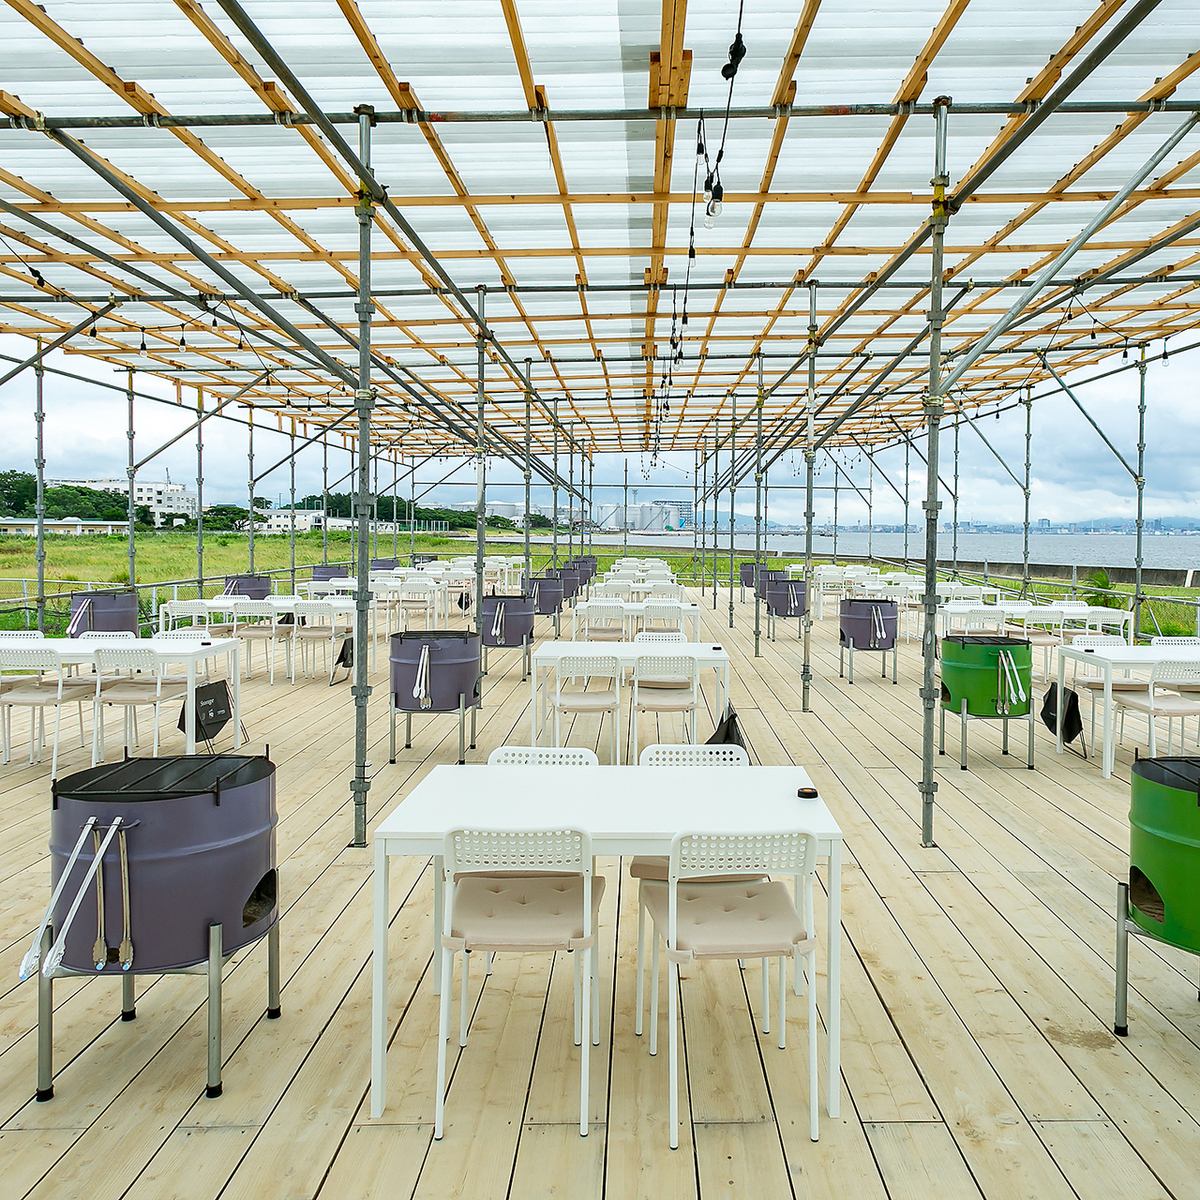 Enjoy BBQ while looking out at Hakata Bay in the open ceiling space!